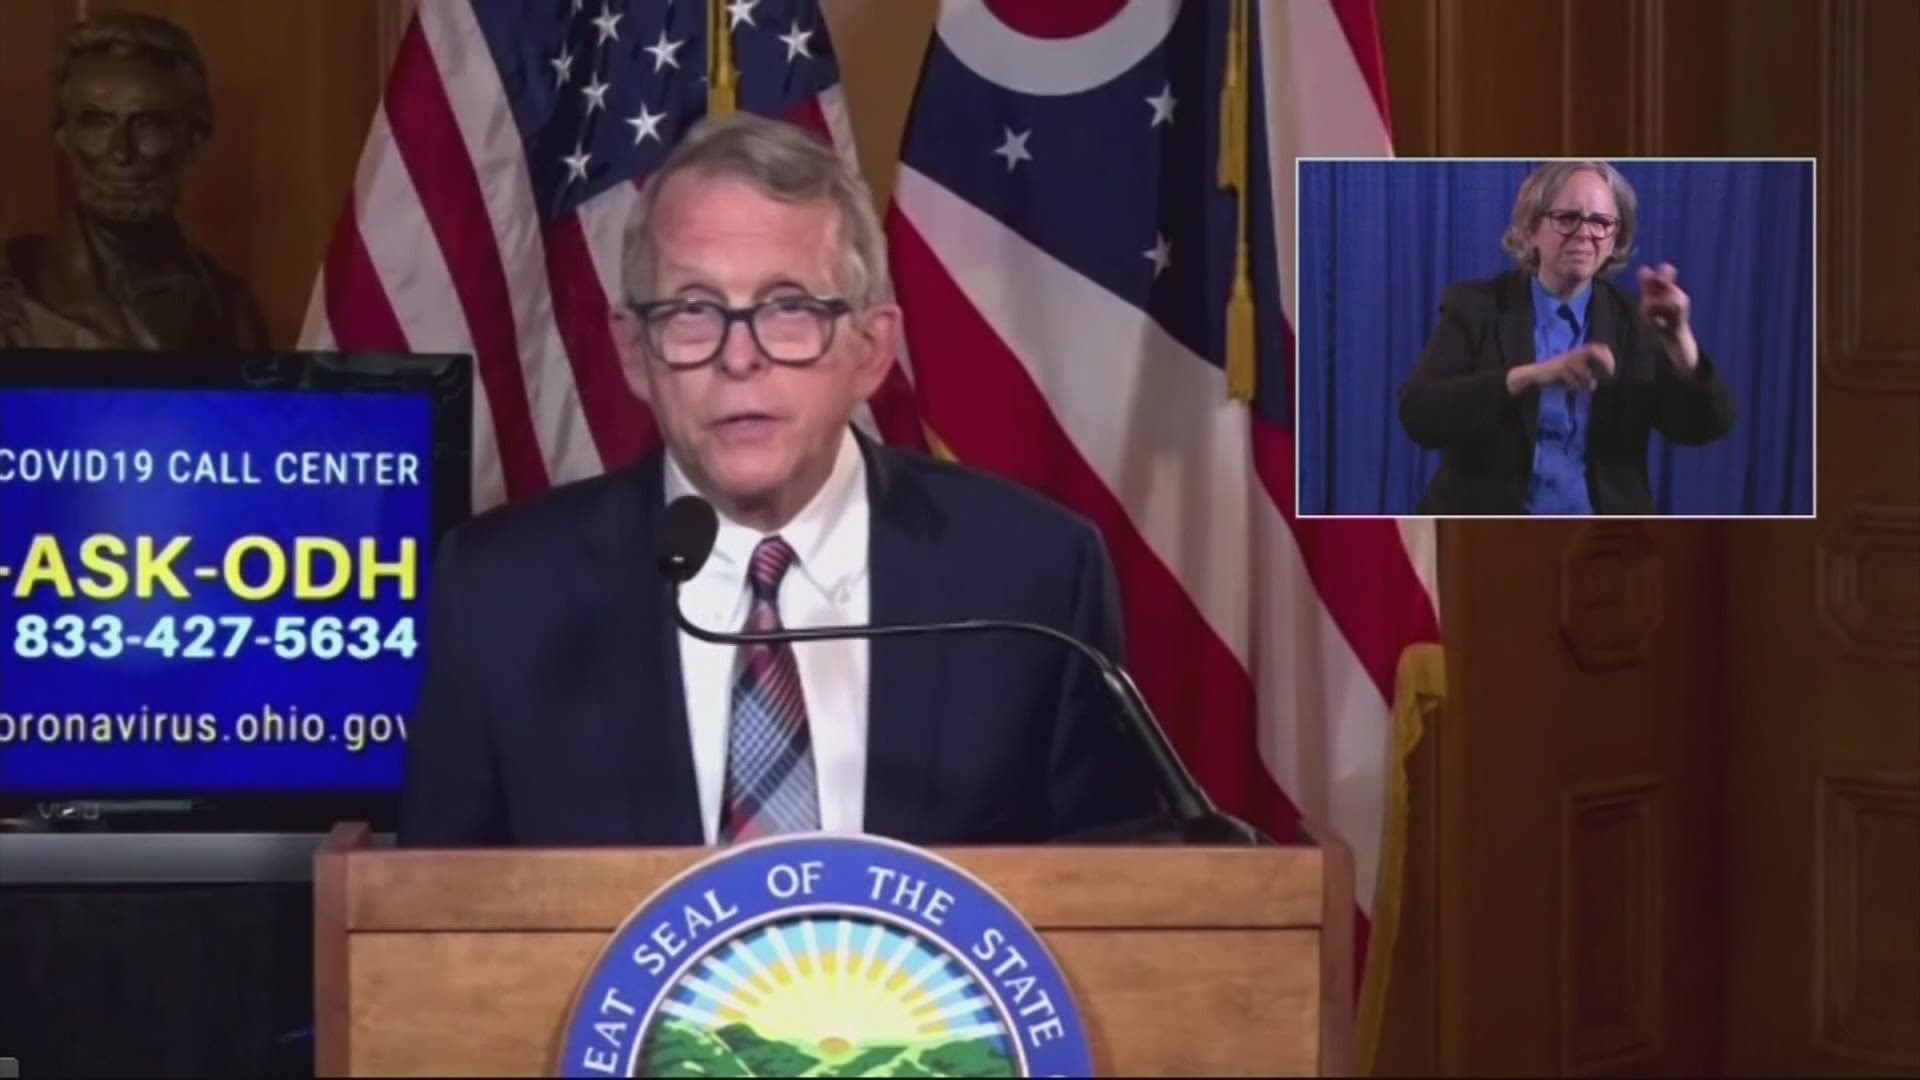 Gov. DeWine said participants would be asked to stay separated in groups of 10 or fewer — rather than merging into one huge crowd.